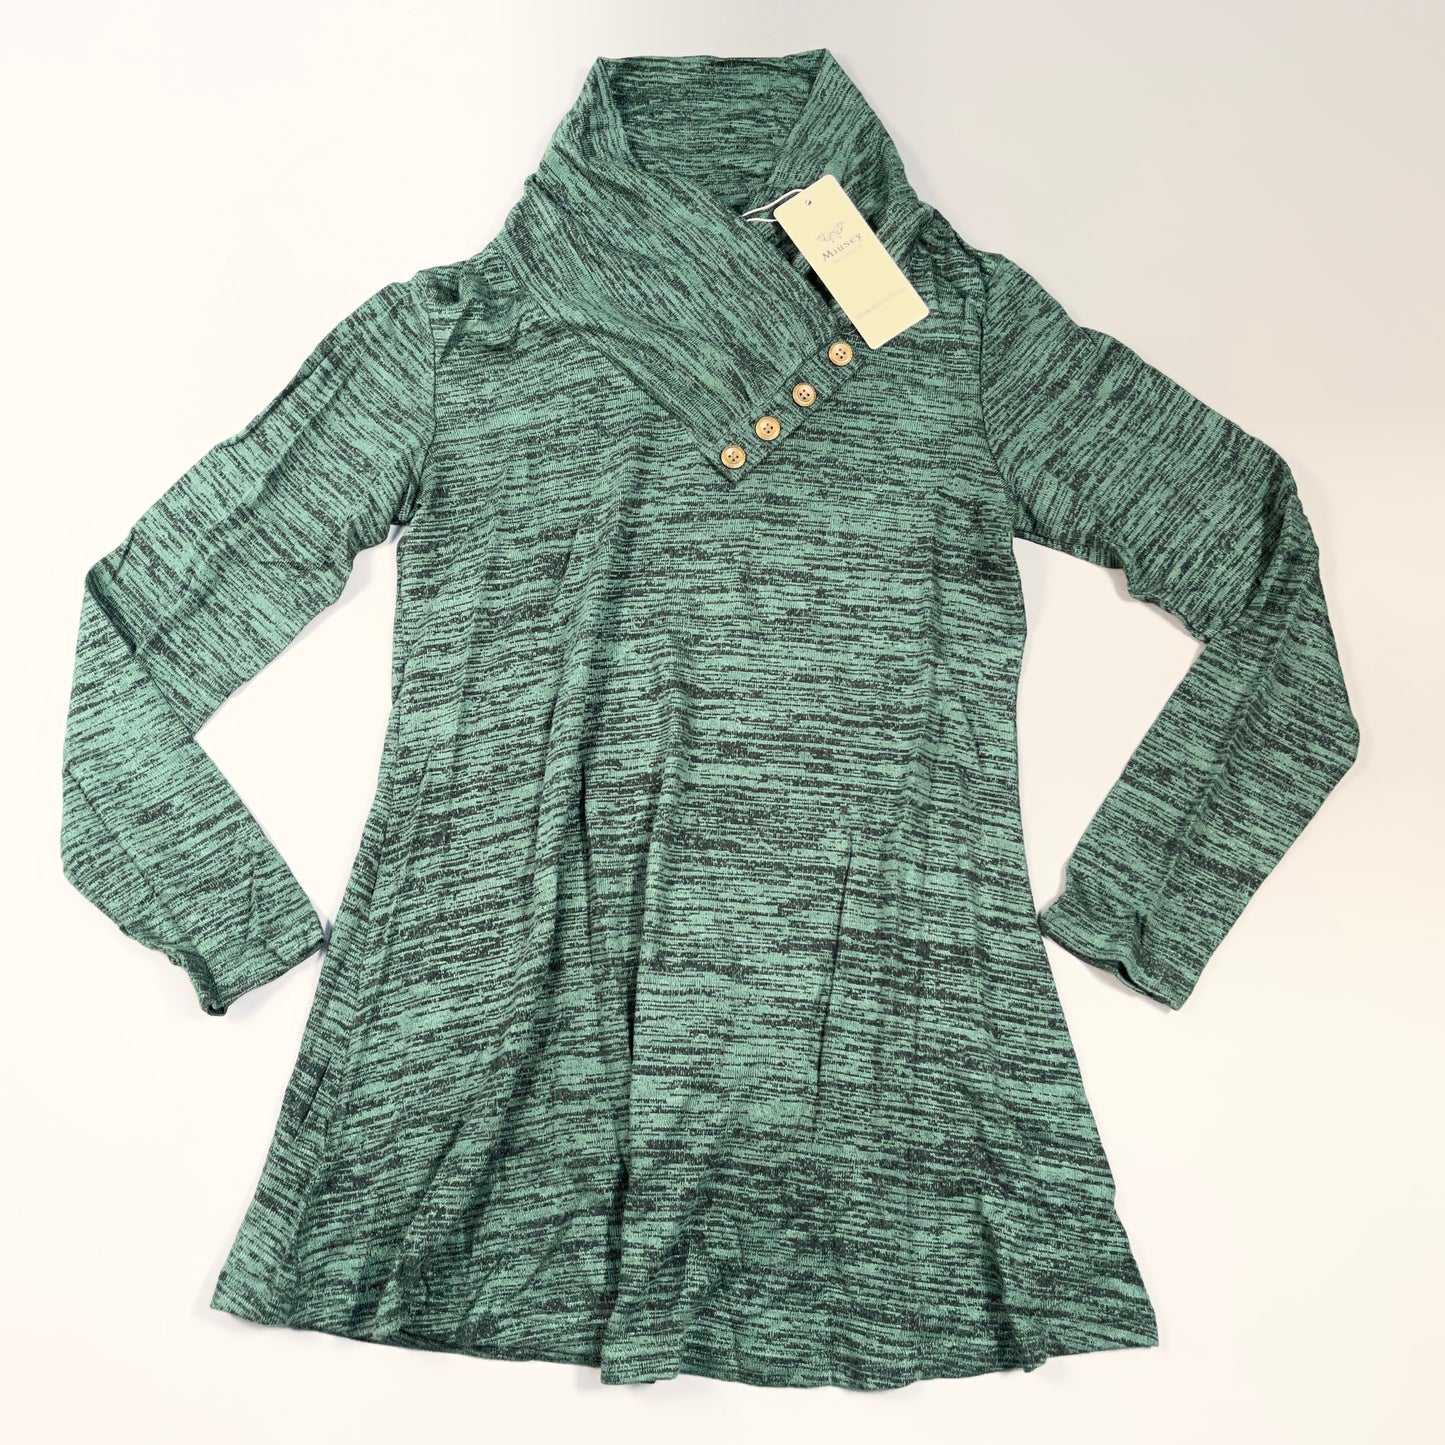 MIUSEY Long Sleeve Cowl Neck Tunic Top Blouse Women's Sz S Marled Green 20807 (New)